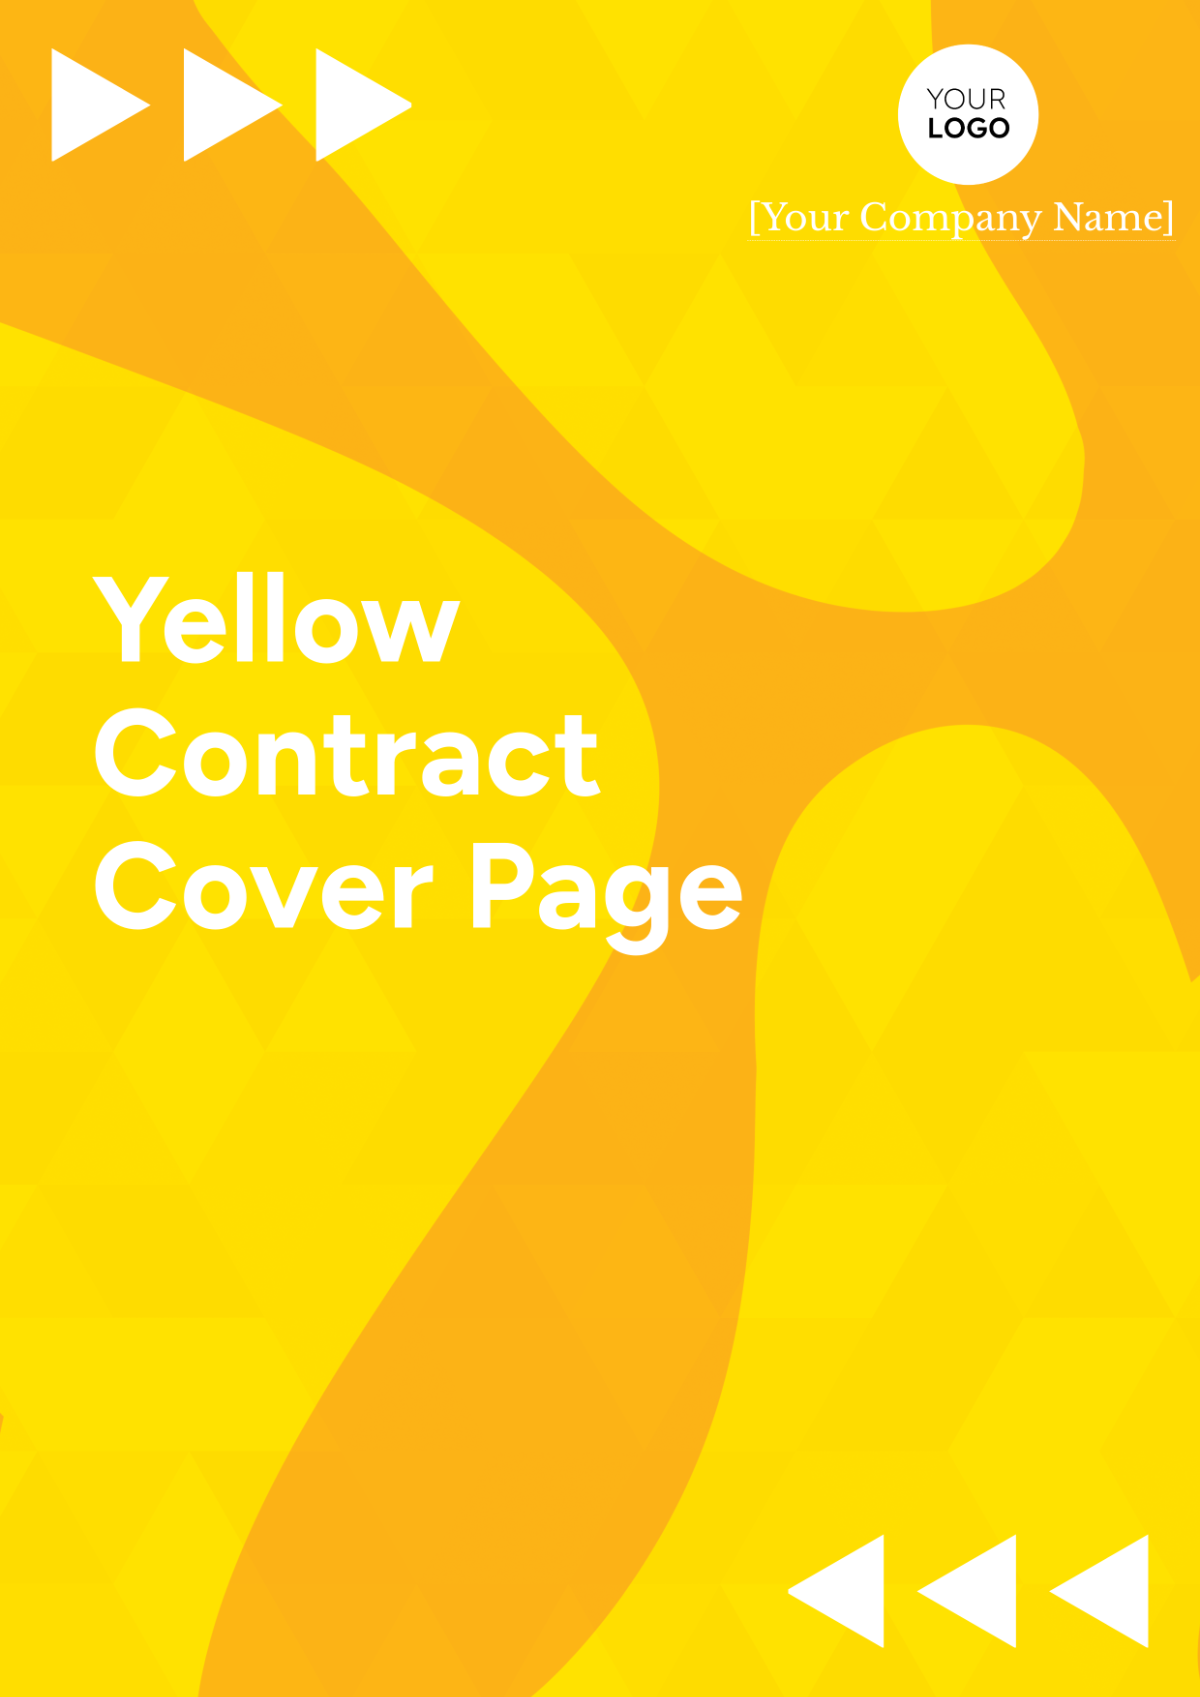 Yellow Contract Cover Page Template